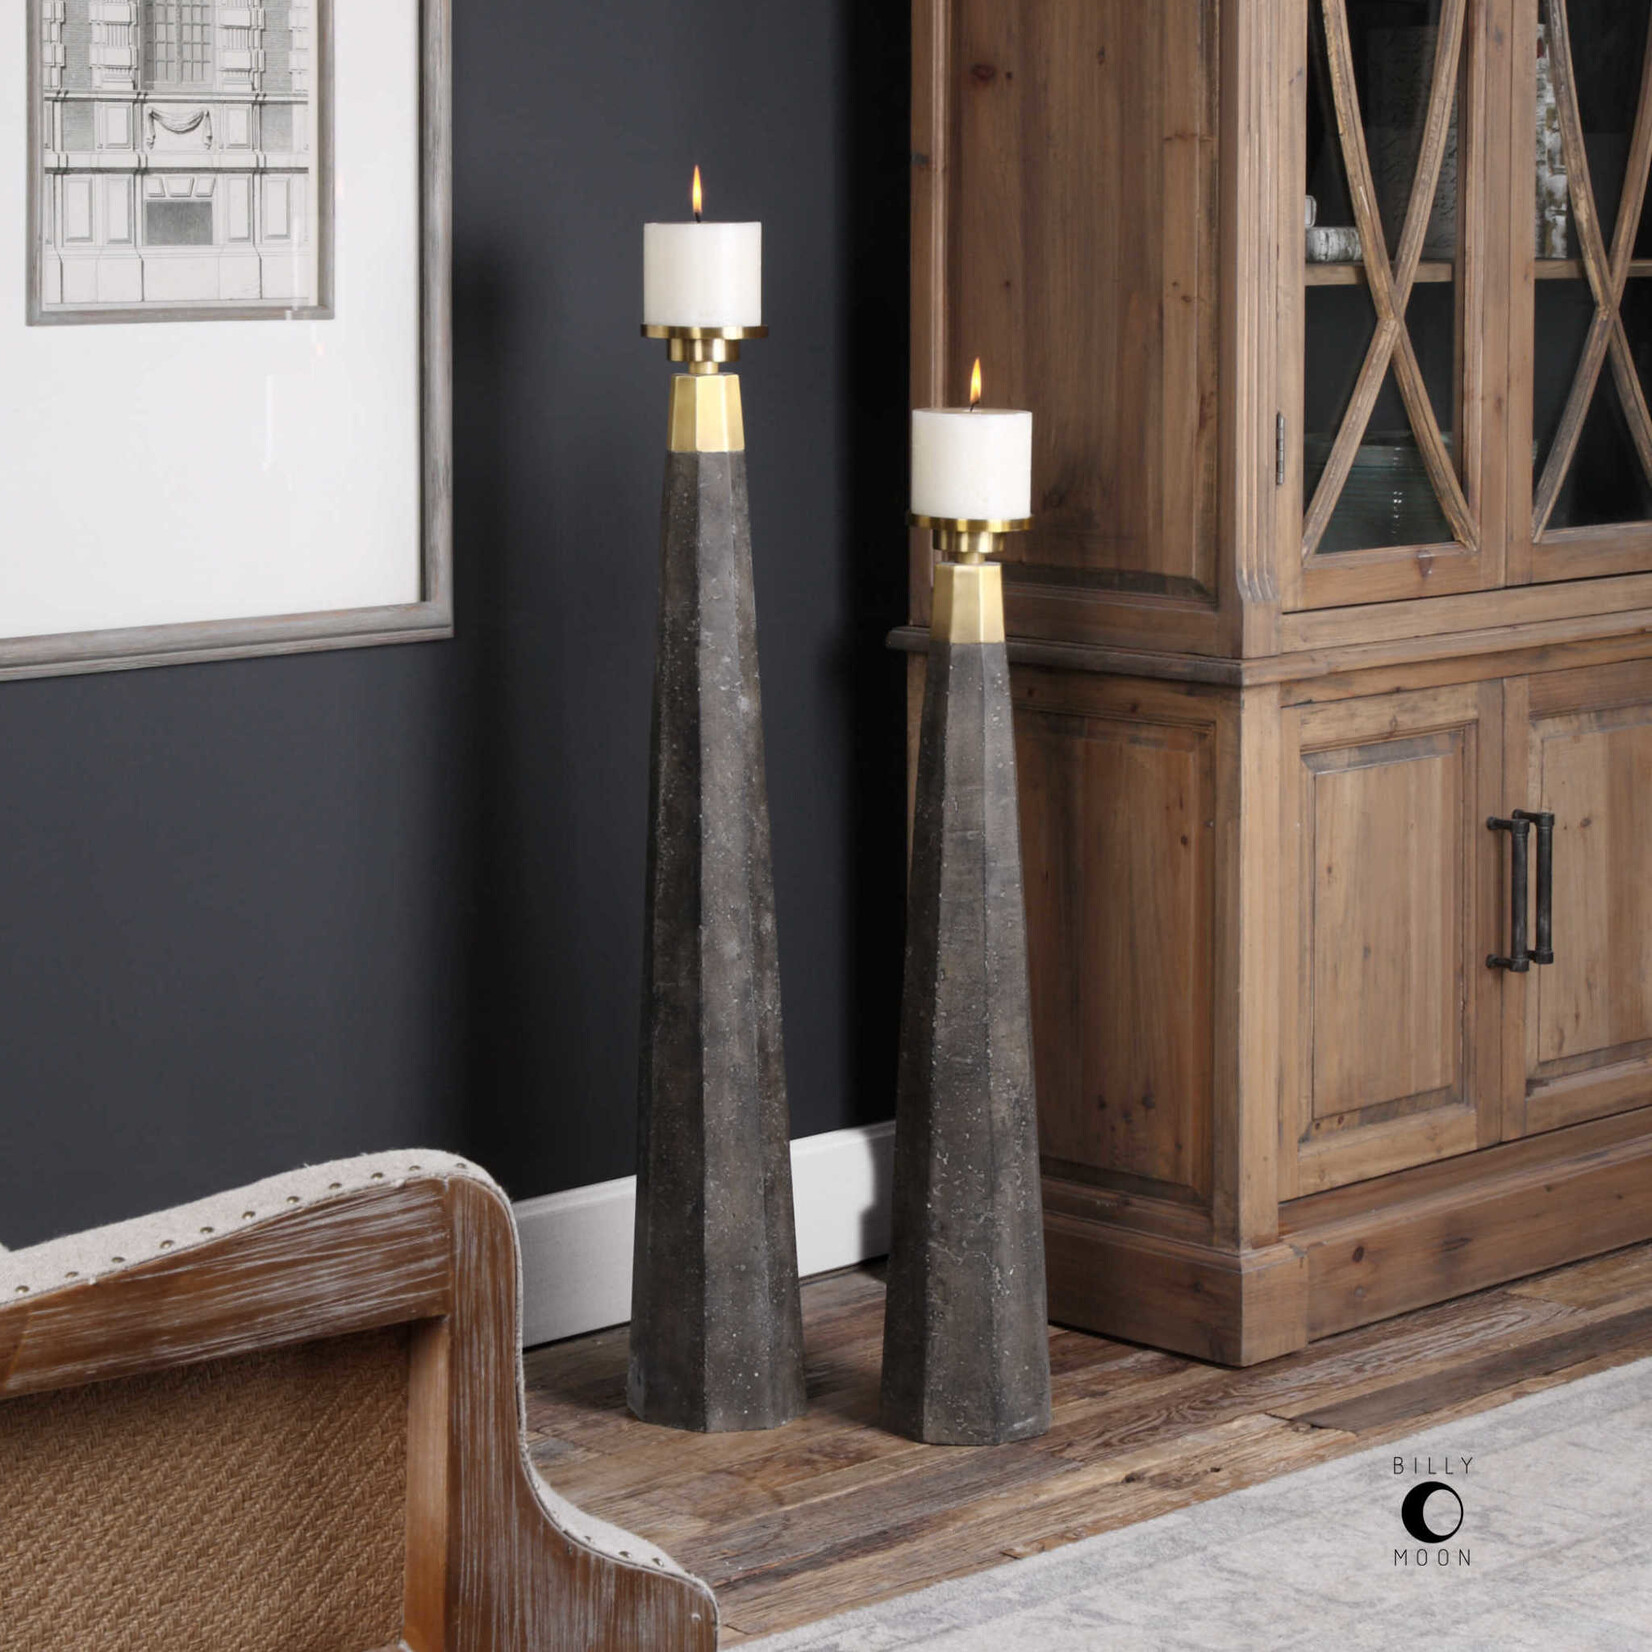 Uttermost / Revelation Pons Candleholder with Pillar Candle - Small 31.5" Includes Candle